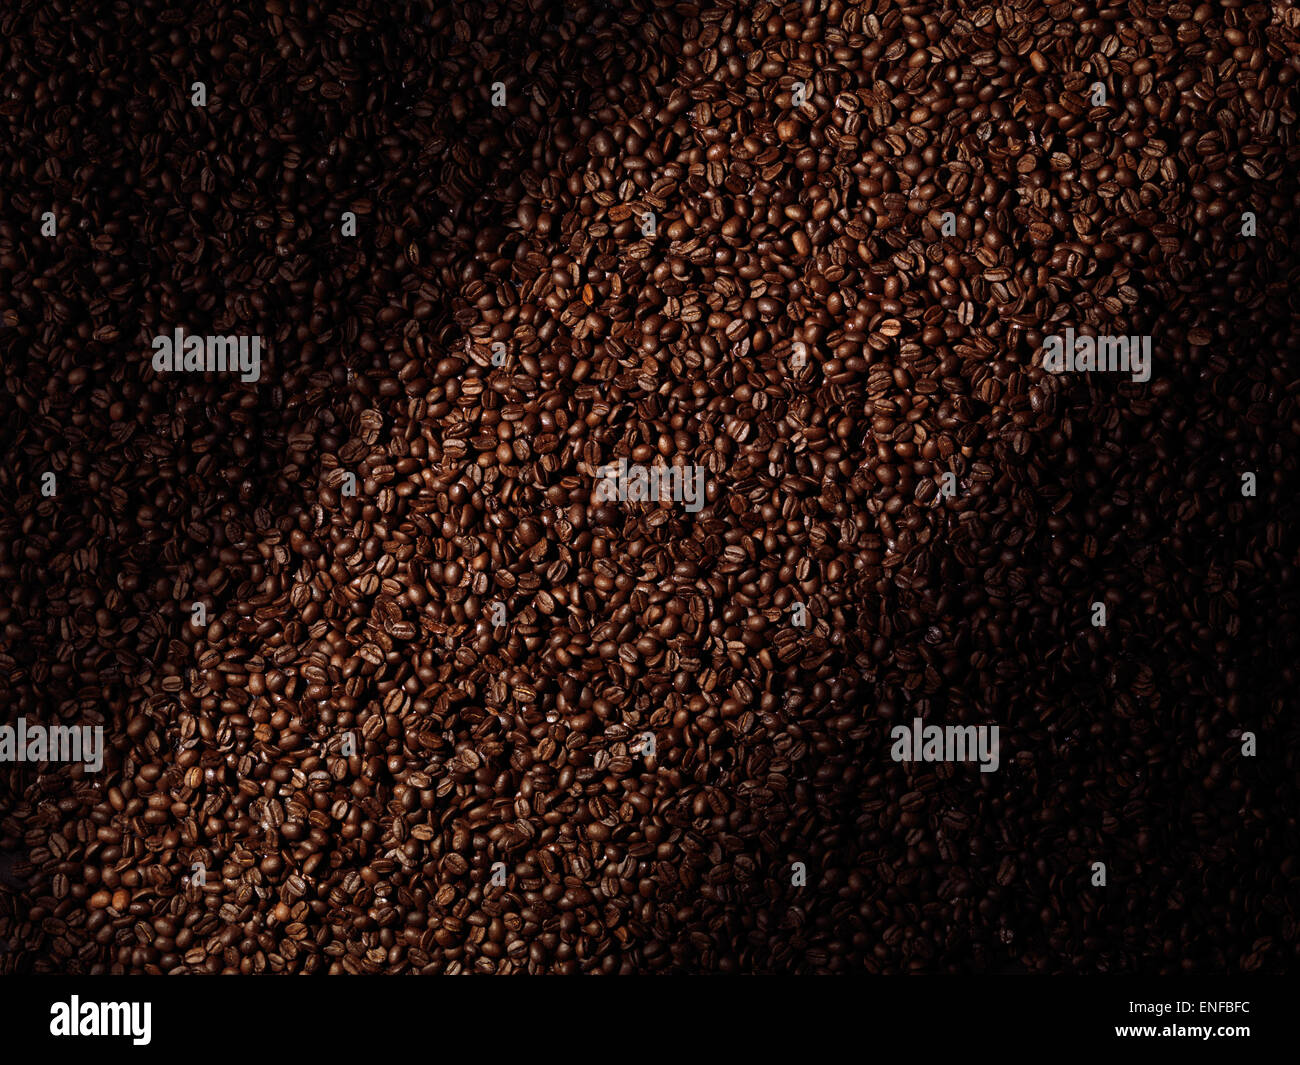 Roasted arabica coffee beans abstract artistic background texture Stock Photo